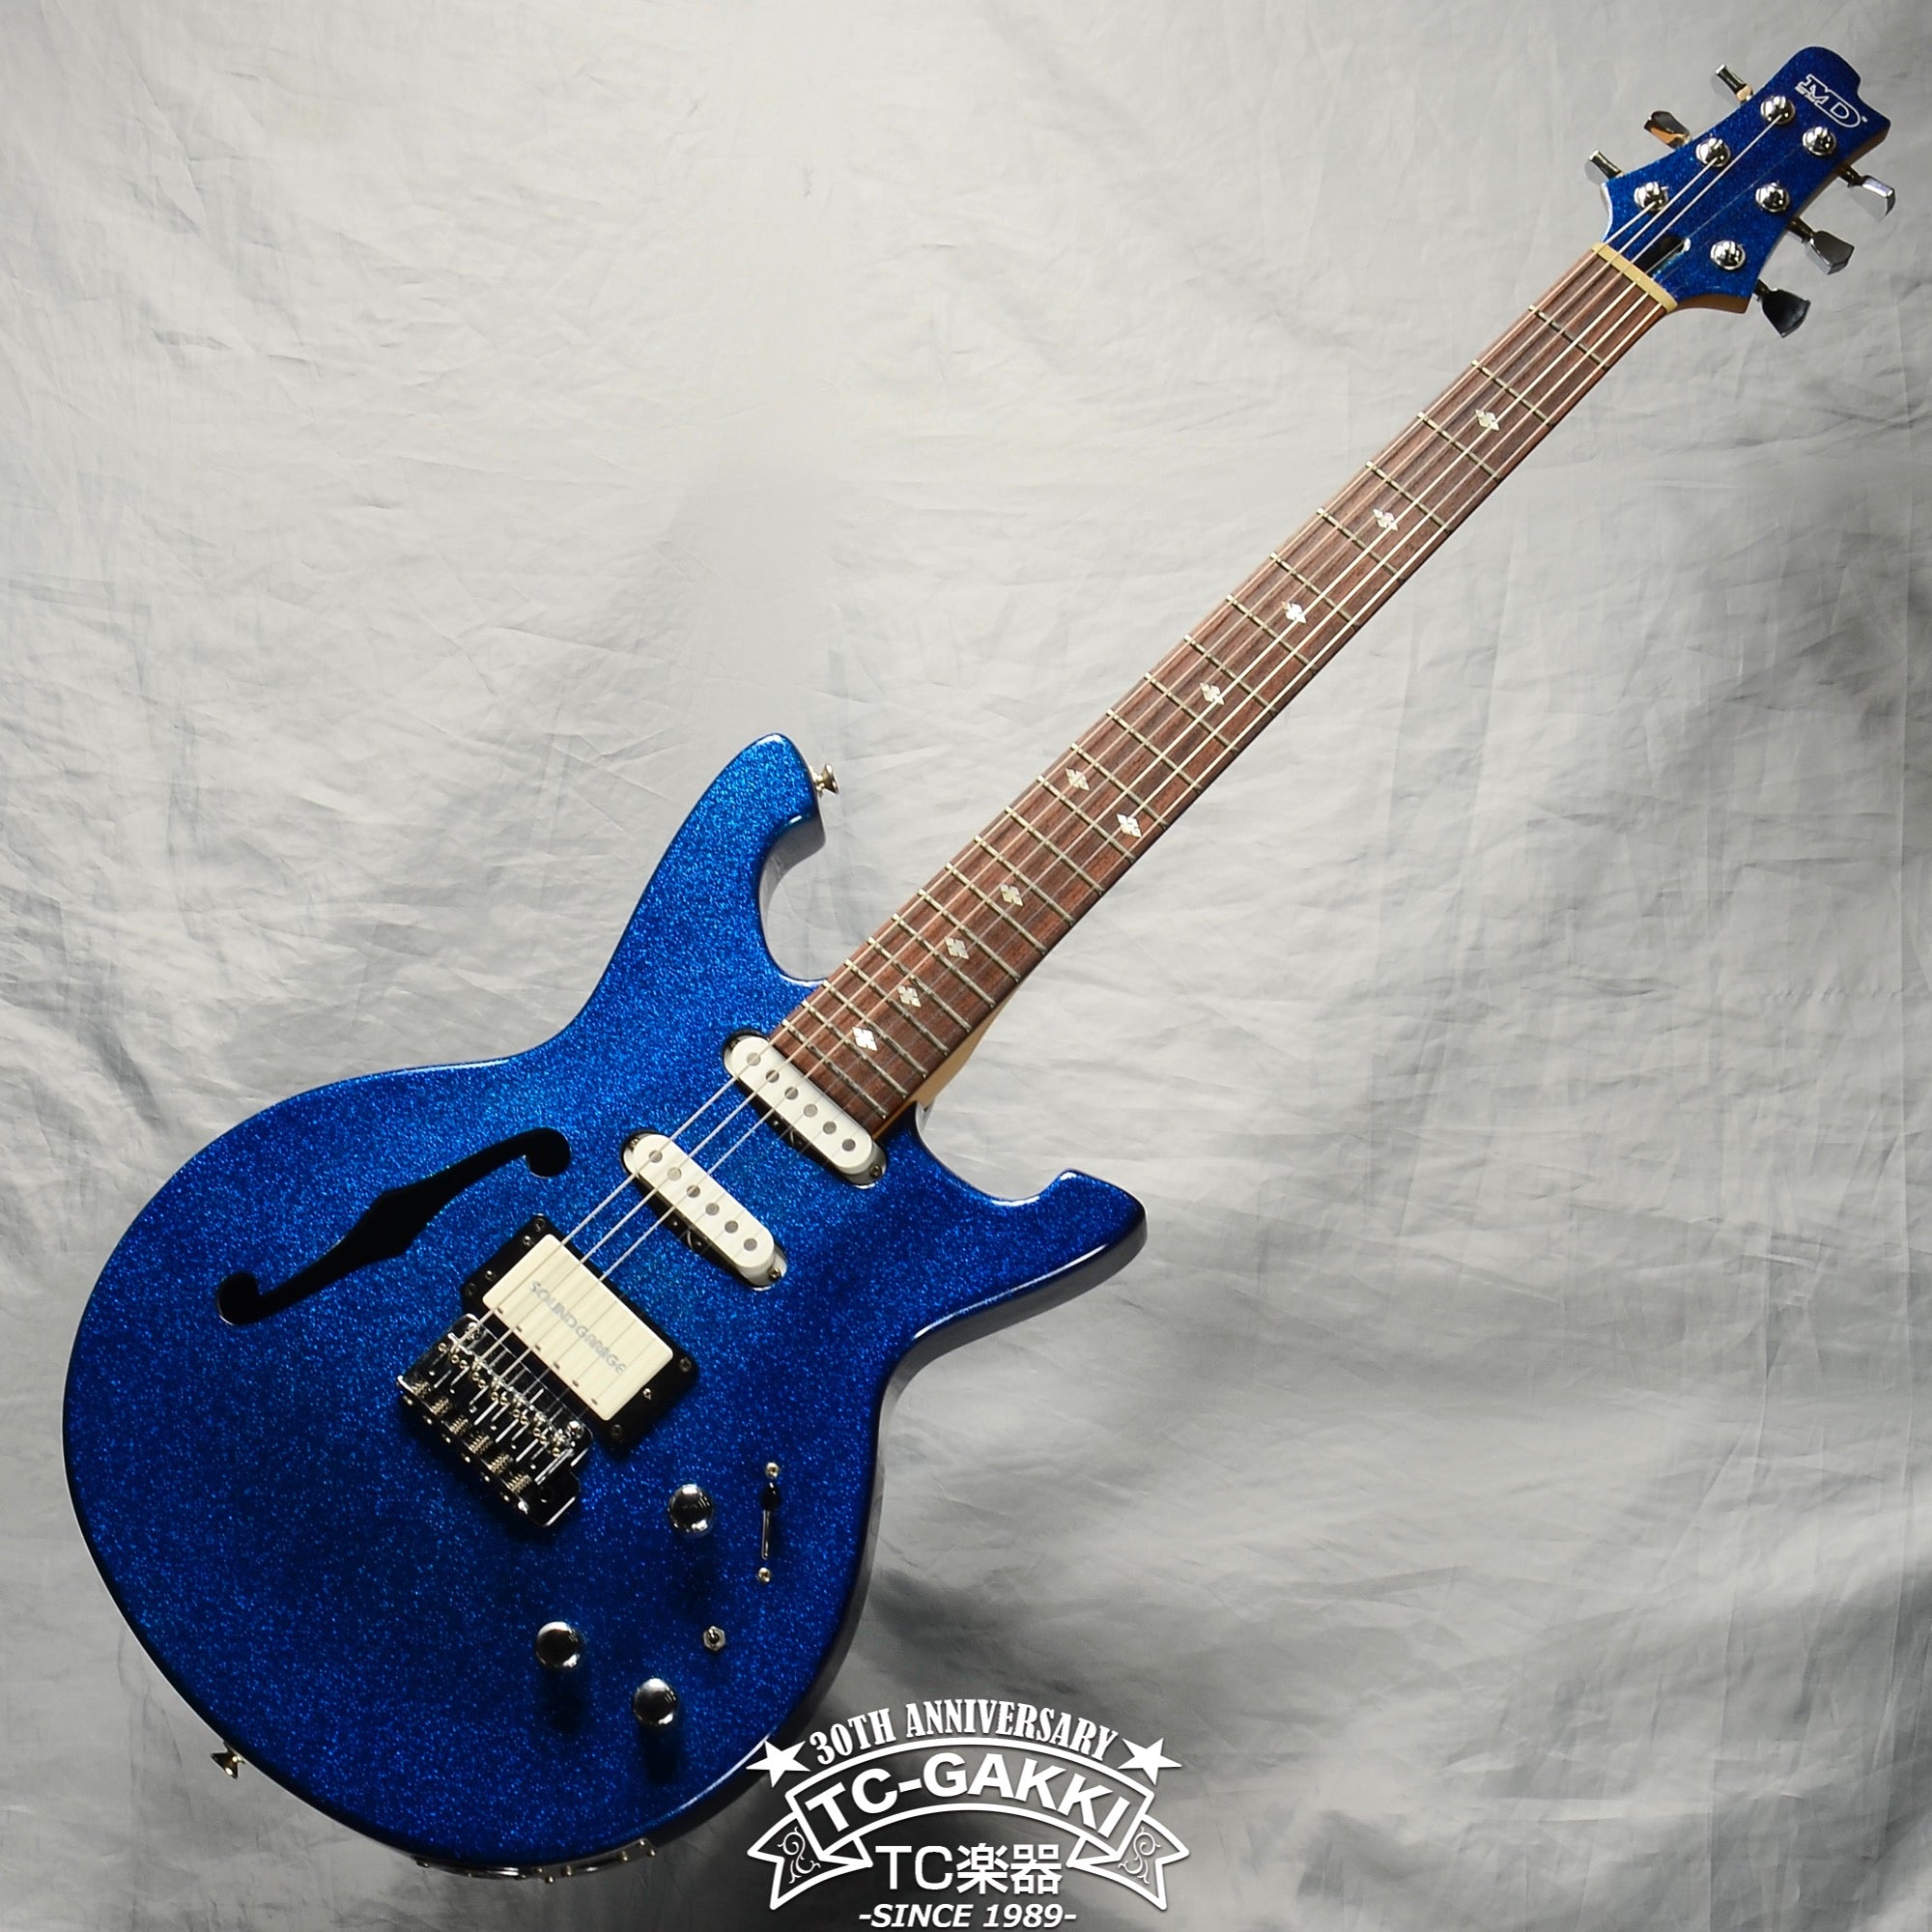 MD Metal Driver MD SS/G 3 0 Guitar For Sale TCGAKKI